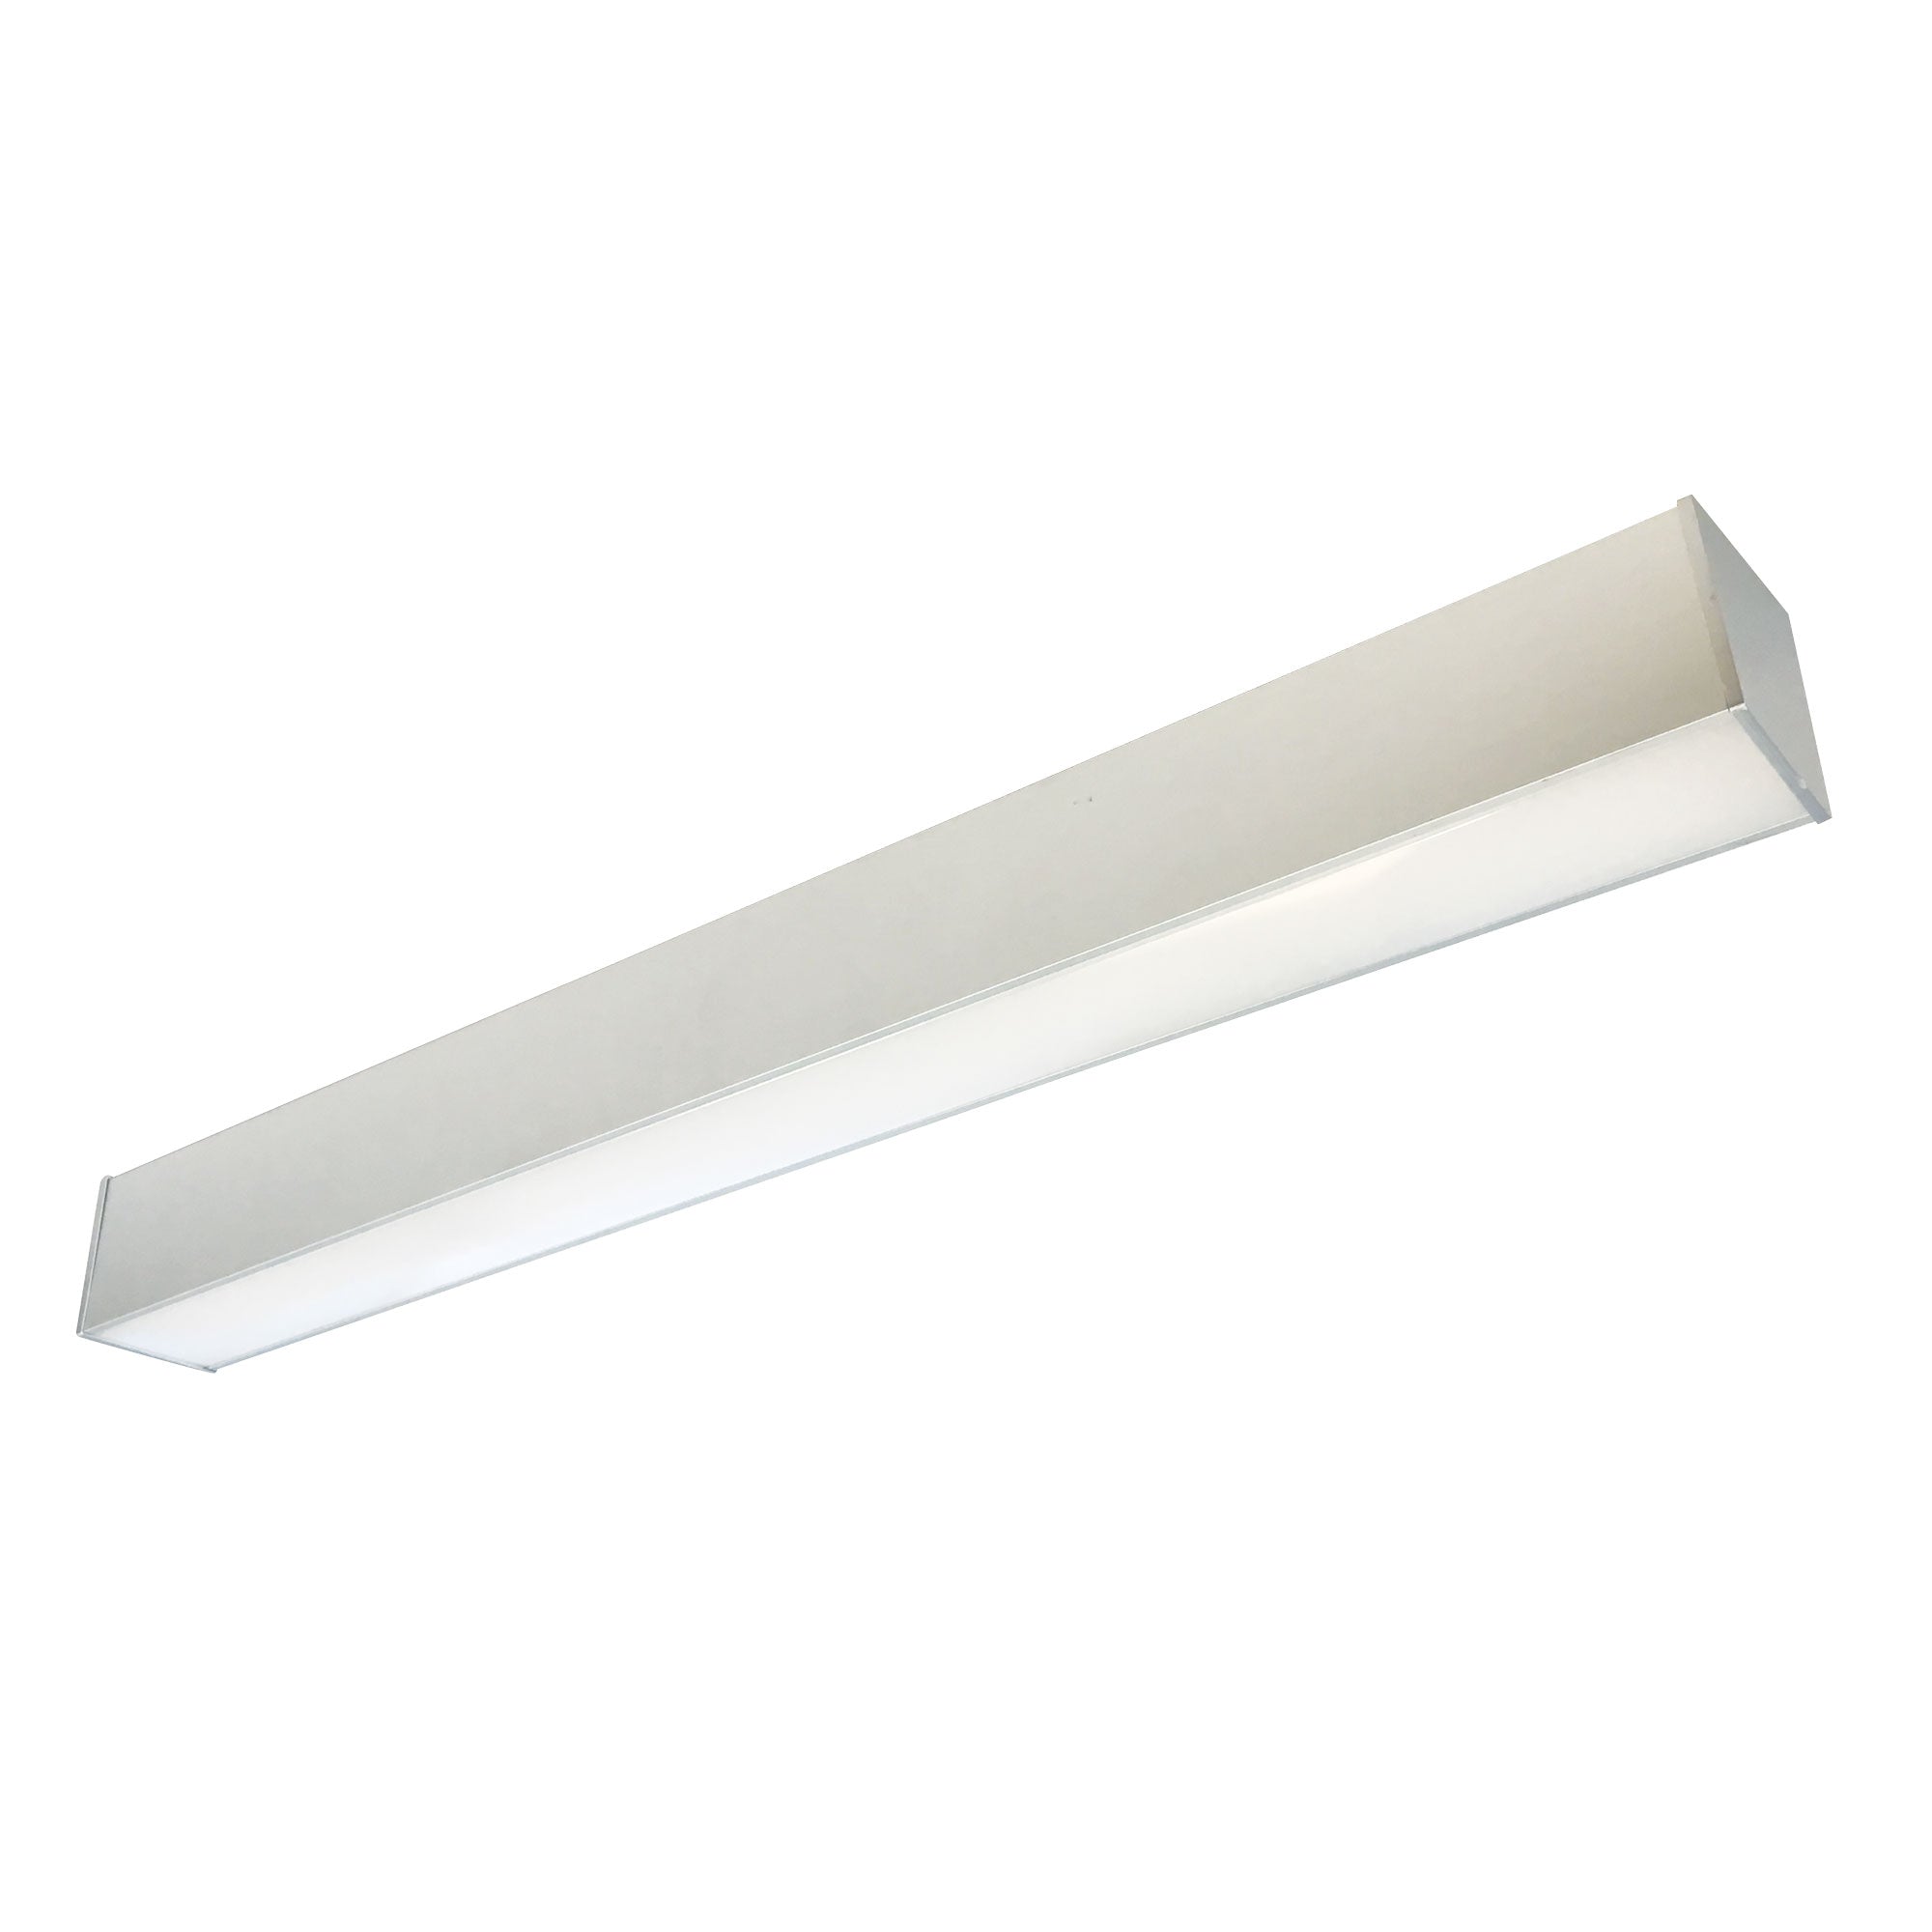 Nora Lighting NLIN-41035A - Linear - 4' L-Line LED Direct Linear w/ Dedicated CCT, 4200lm / 3500K, Aluminum Finish